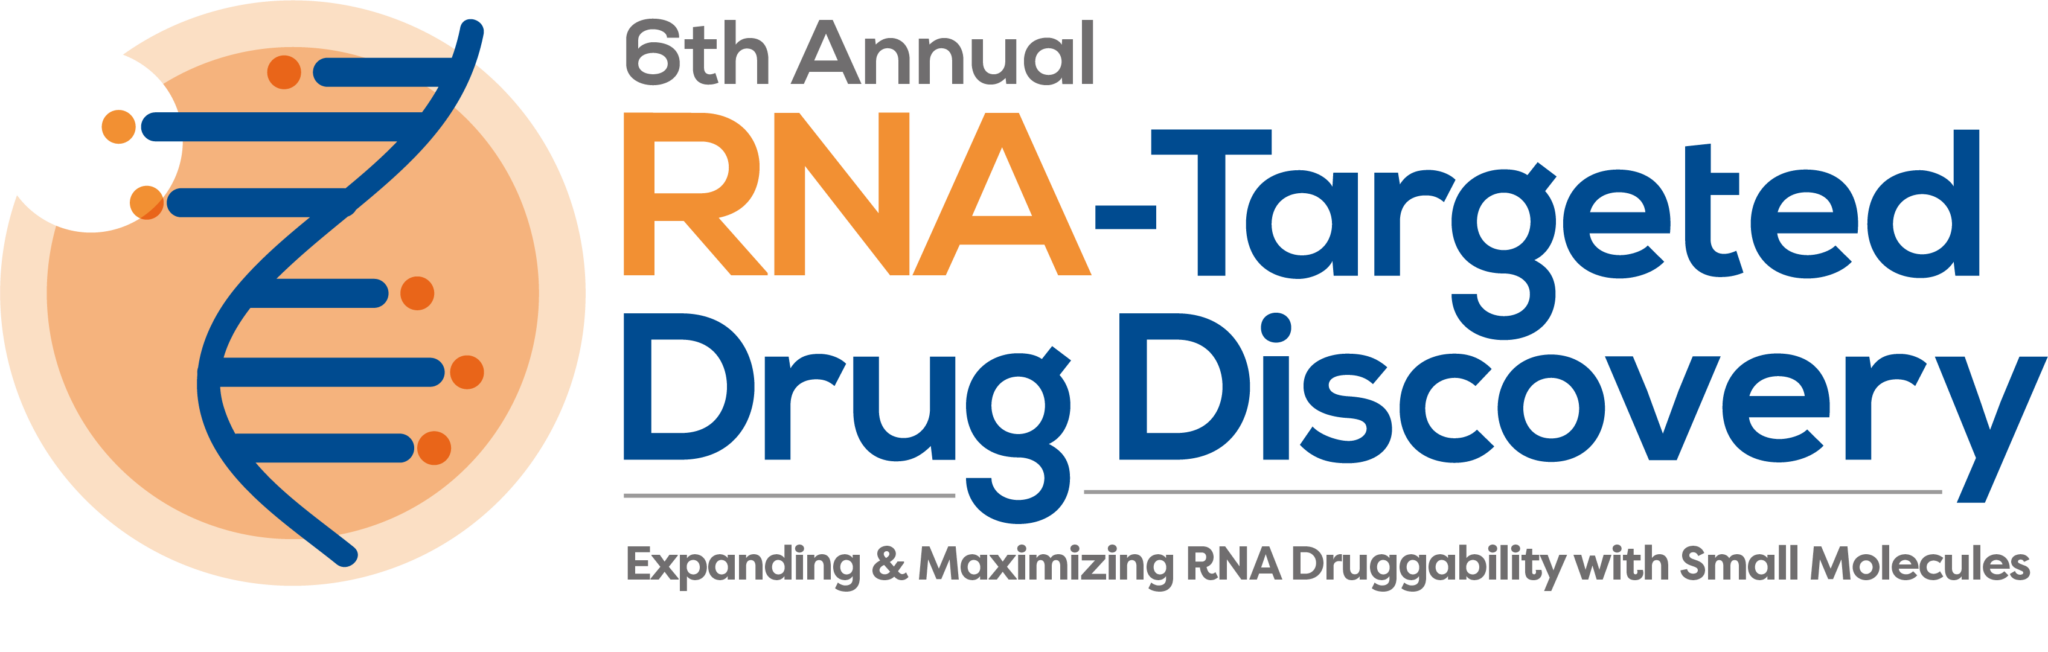 6th-RNA-Targeted-Drug-Discovery-logo-2048x652